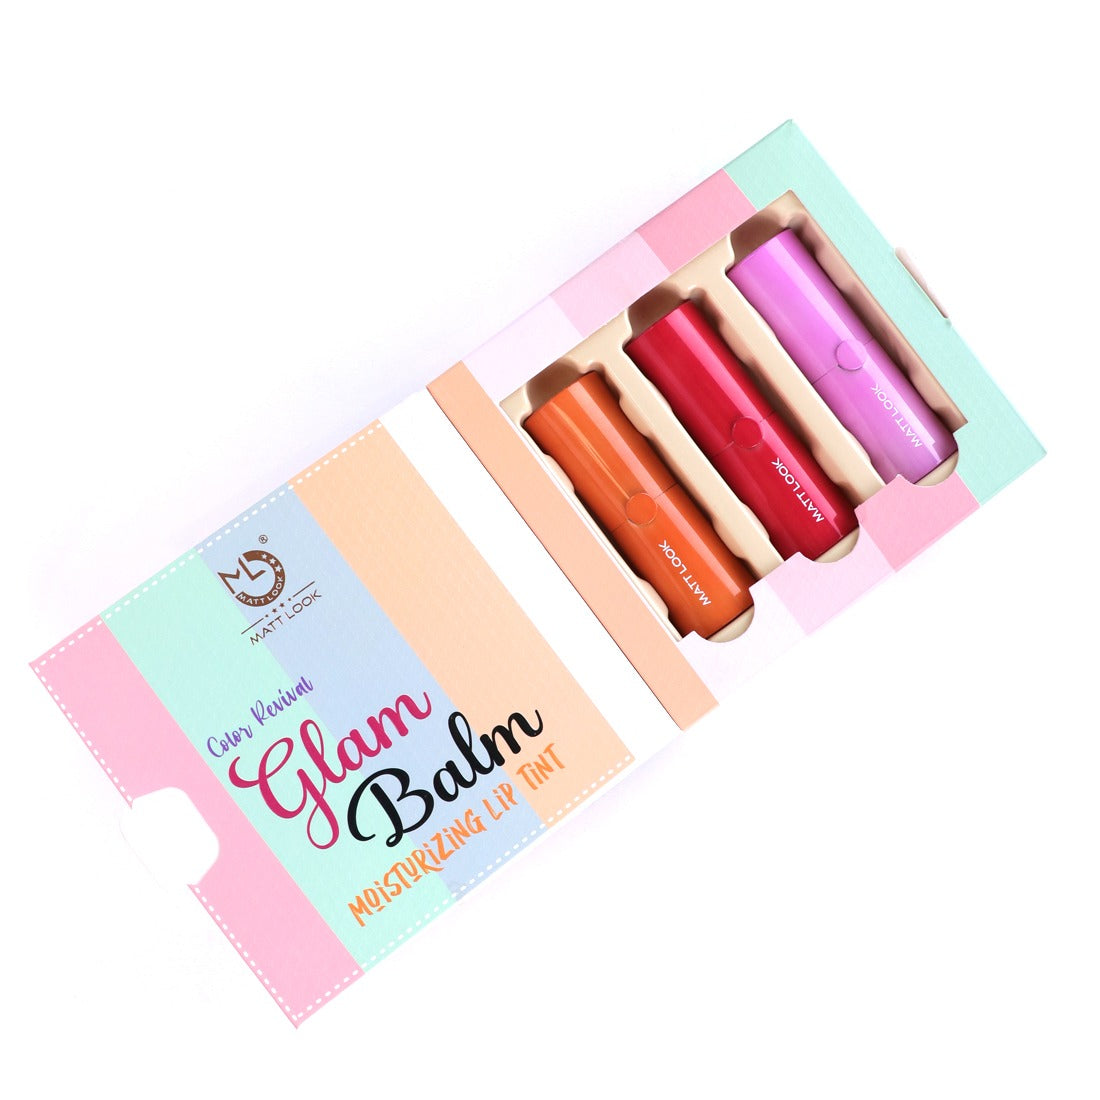 Matt Look Color Revival Glam Balm Moisturizing Lip Tint, Glam Lip Balm, Highly Moisturizing Lip tint, Long stay Lip balm, Smooth application, Hydrating formula, Peppy color range, Pack of three, Multicolor (41.8gm)